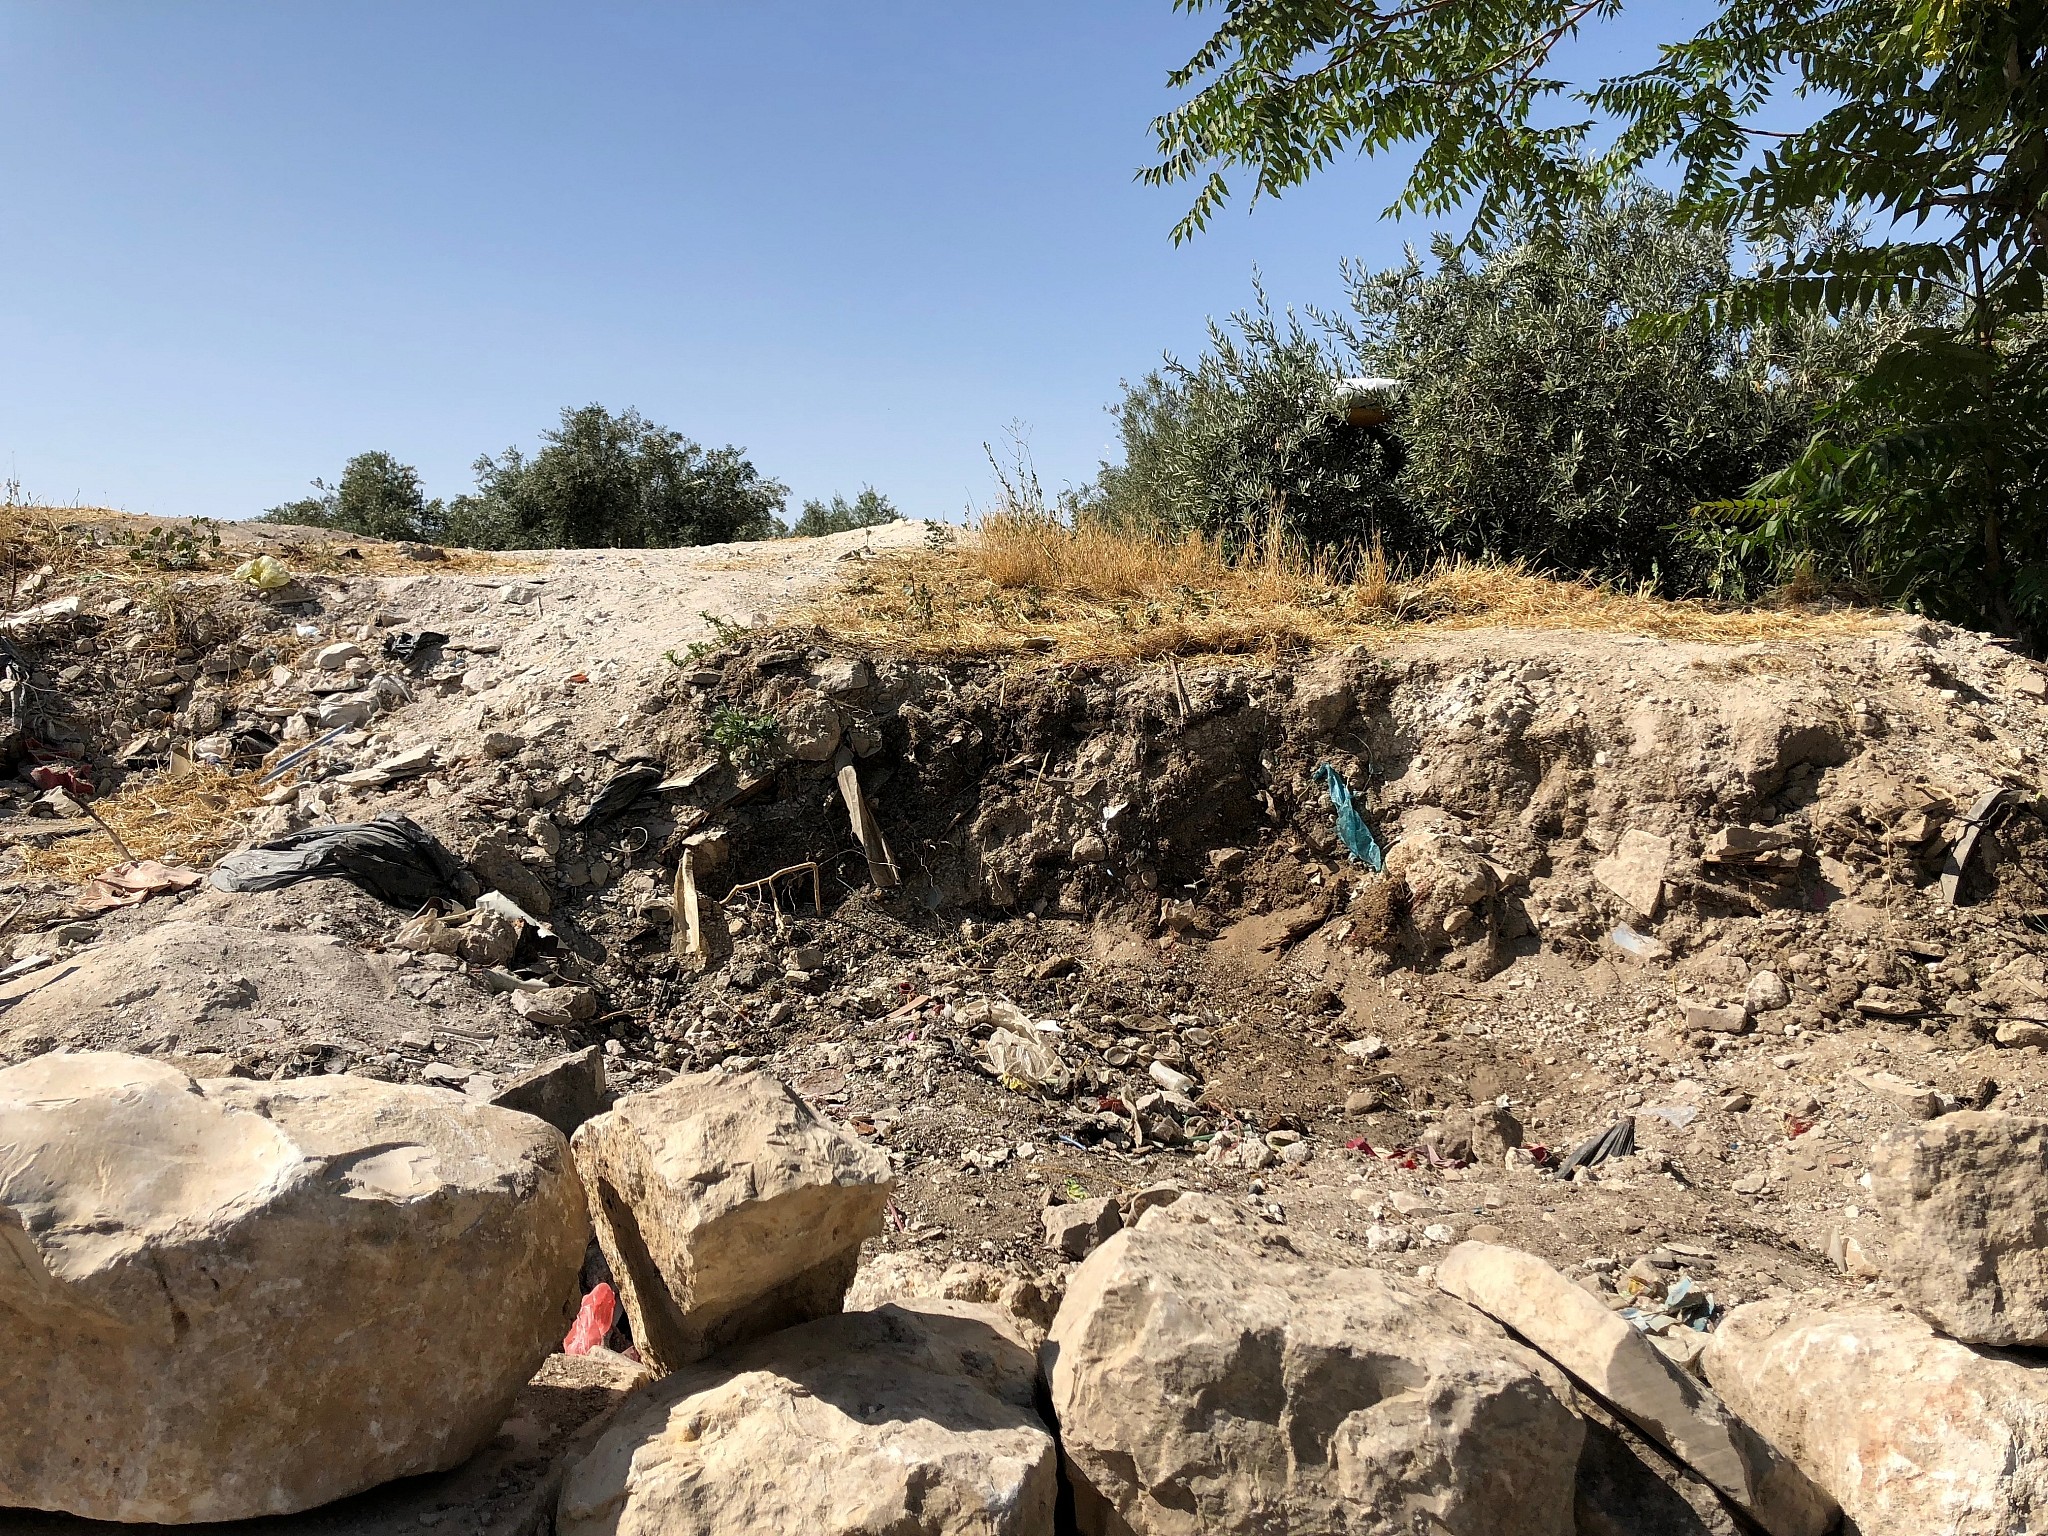 Muslim cleanup project 'illegally disturbed, removed' ancient soil on ...